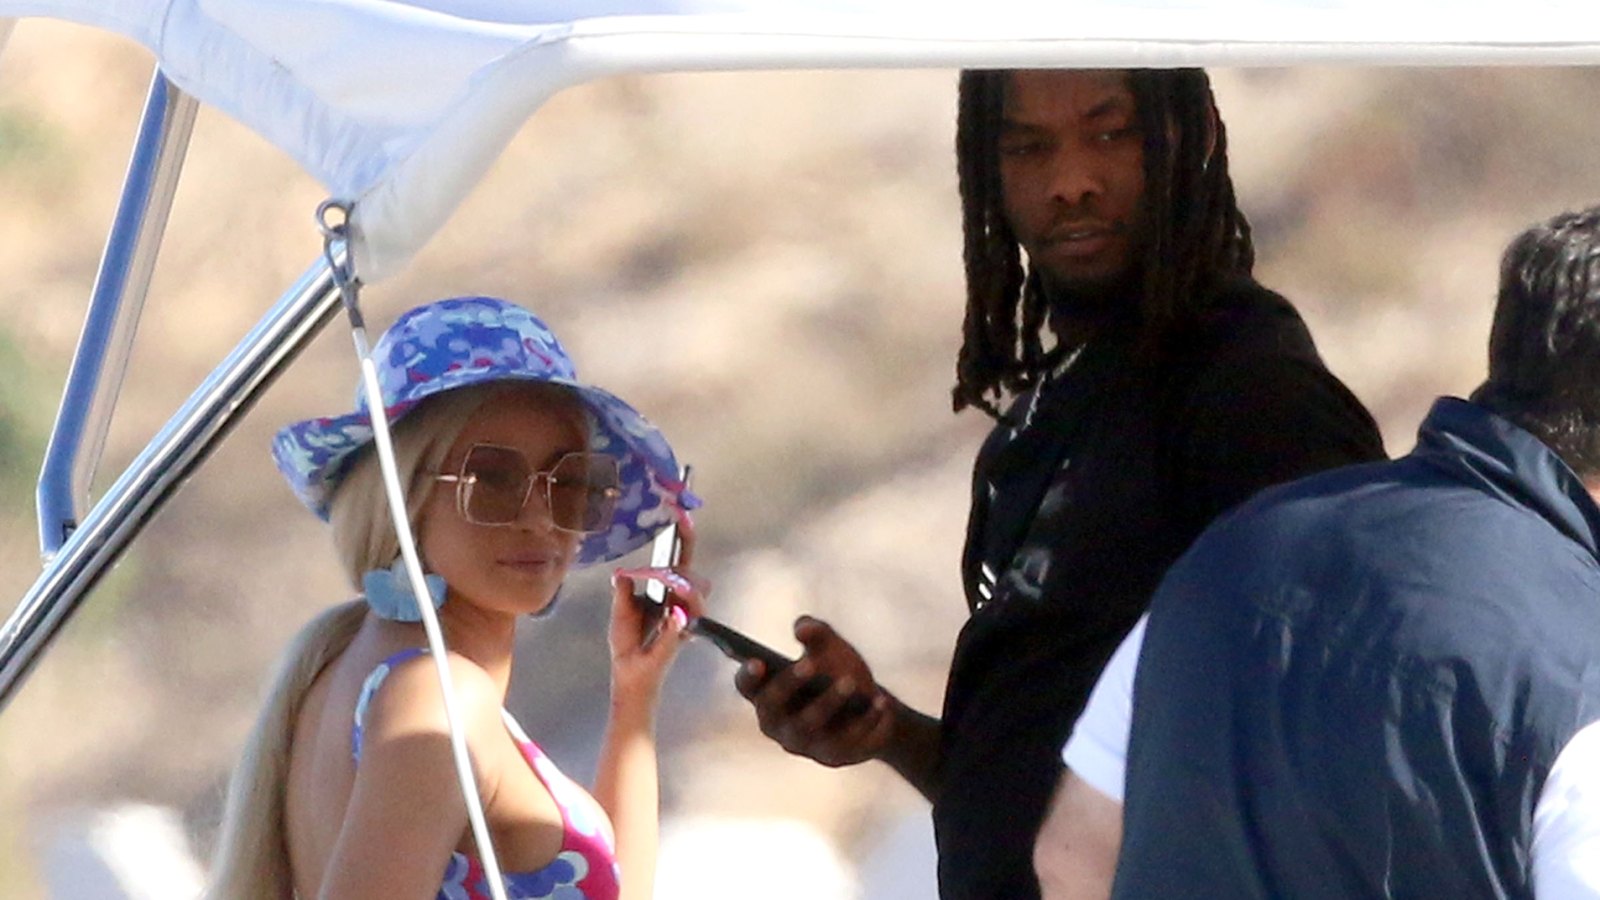 Cardi B and Offset Were ‘All Over Each Other’ During Cabo San Lucas Getaway